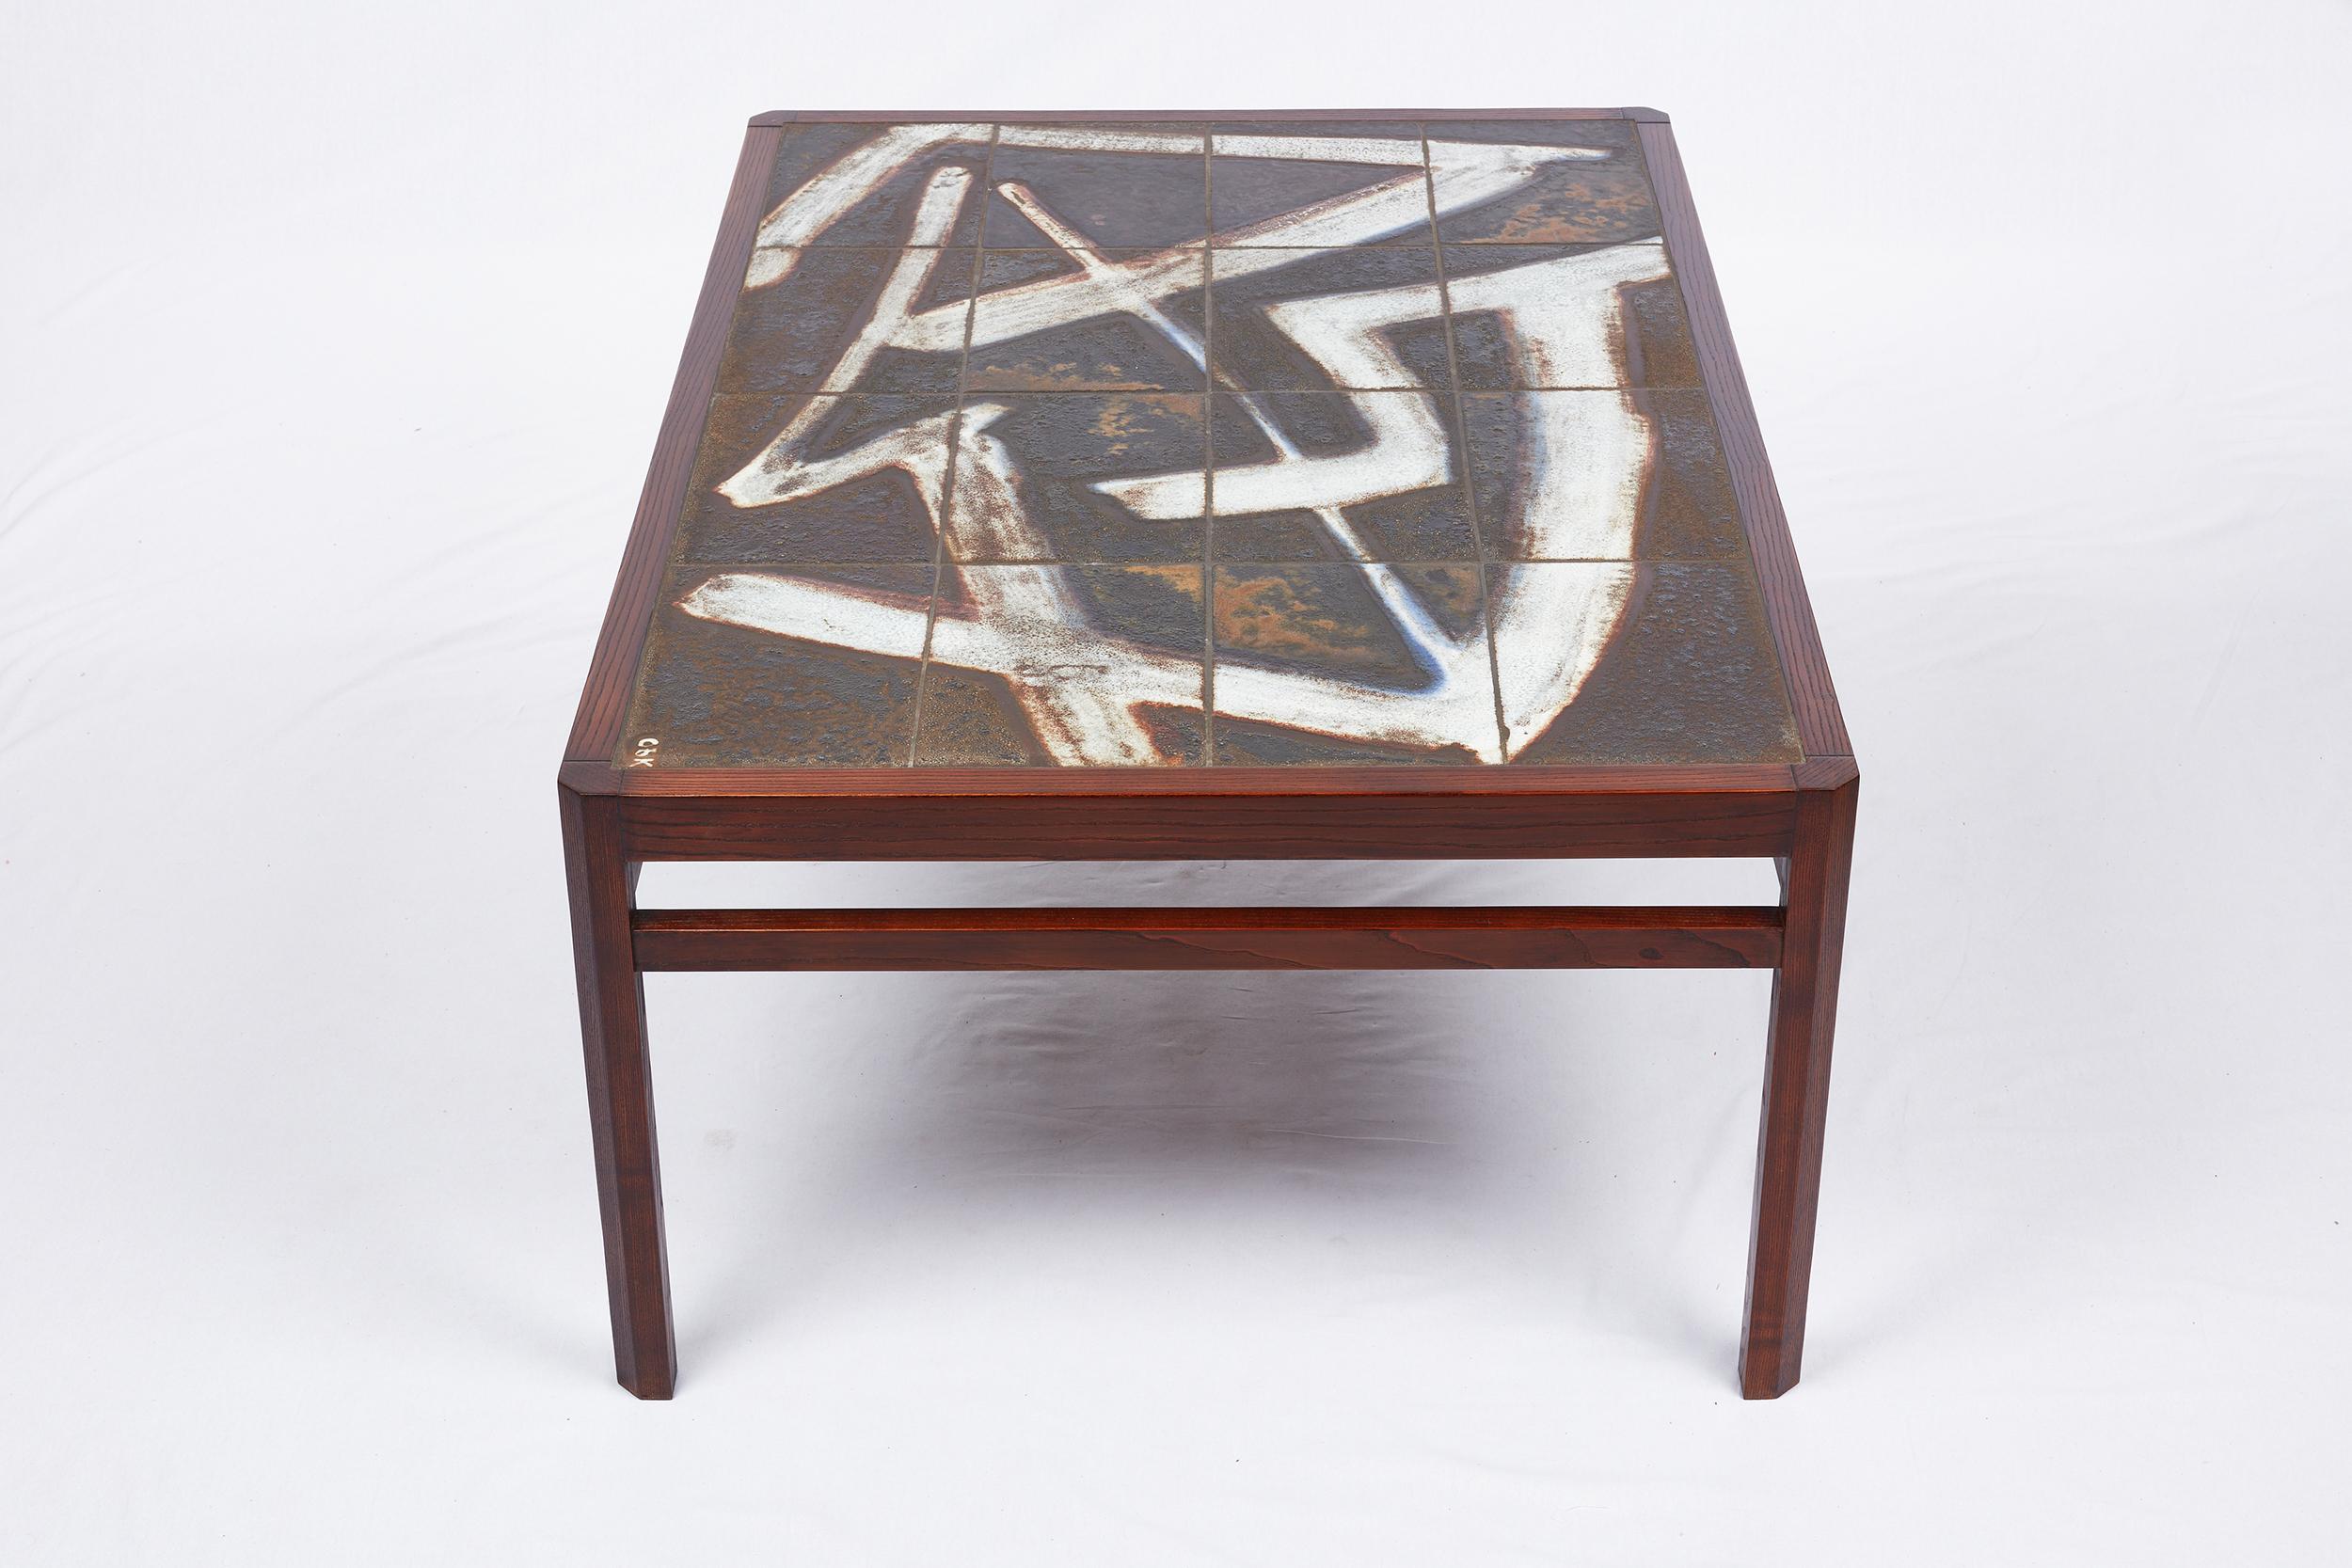 Ole Bjorn Kruger tile coffee table. Fabulous abstract artwork. Dark stained oak legs and frame. We can trim the legs if they are too tall.